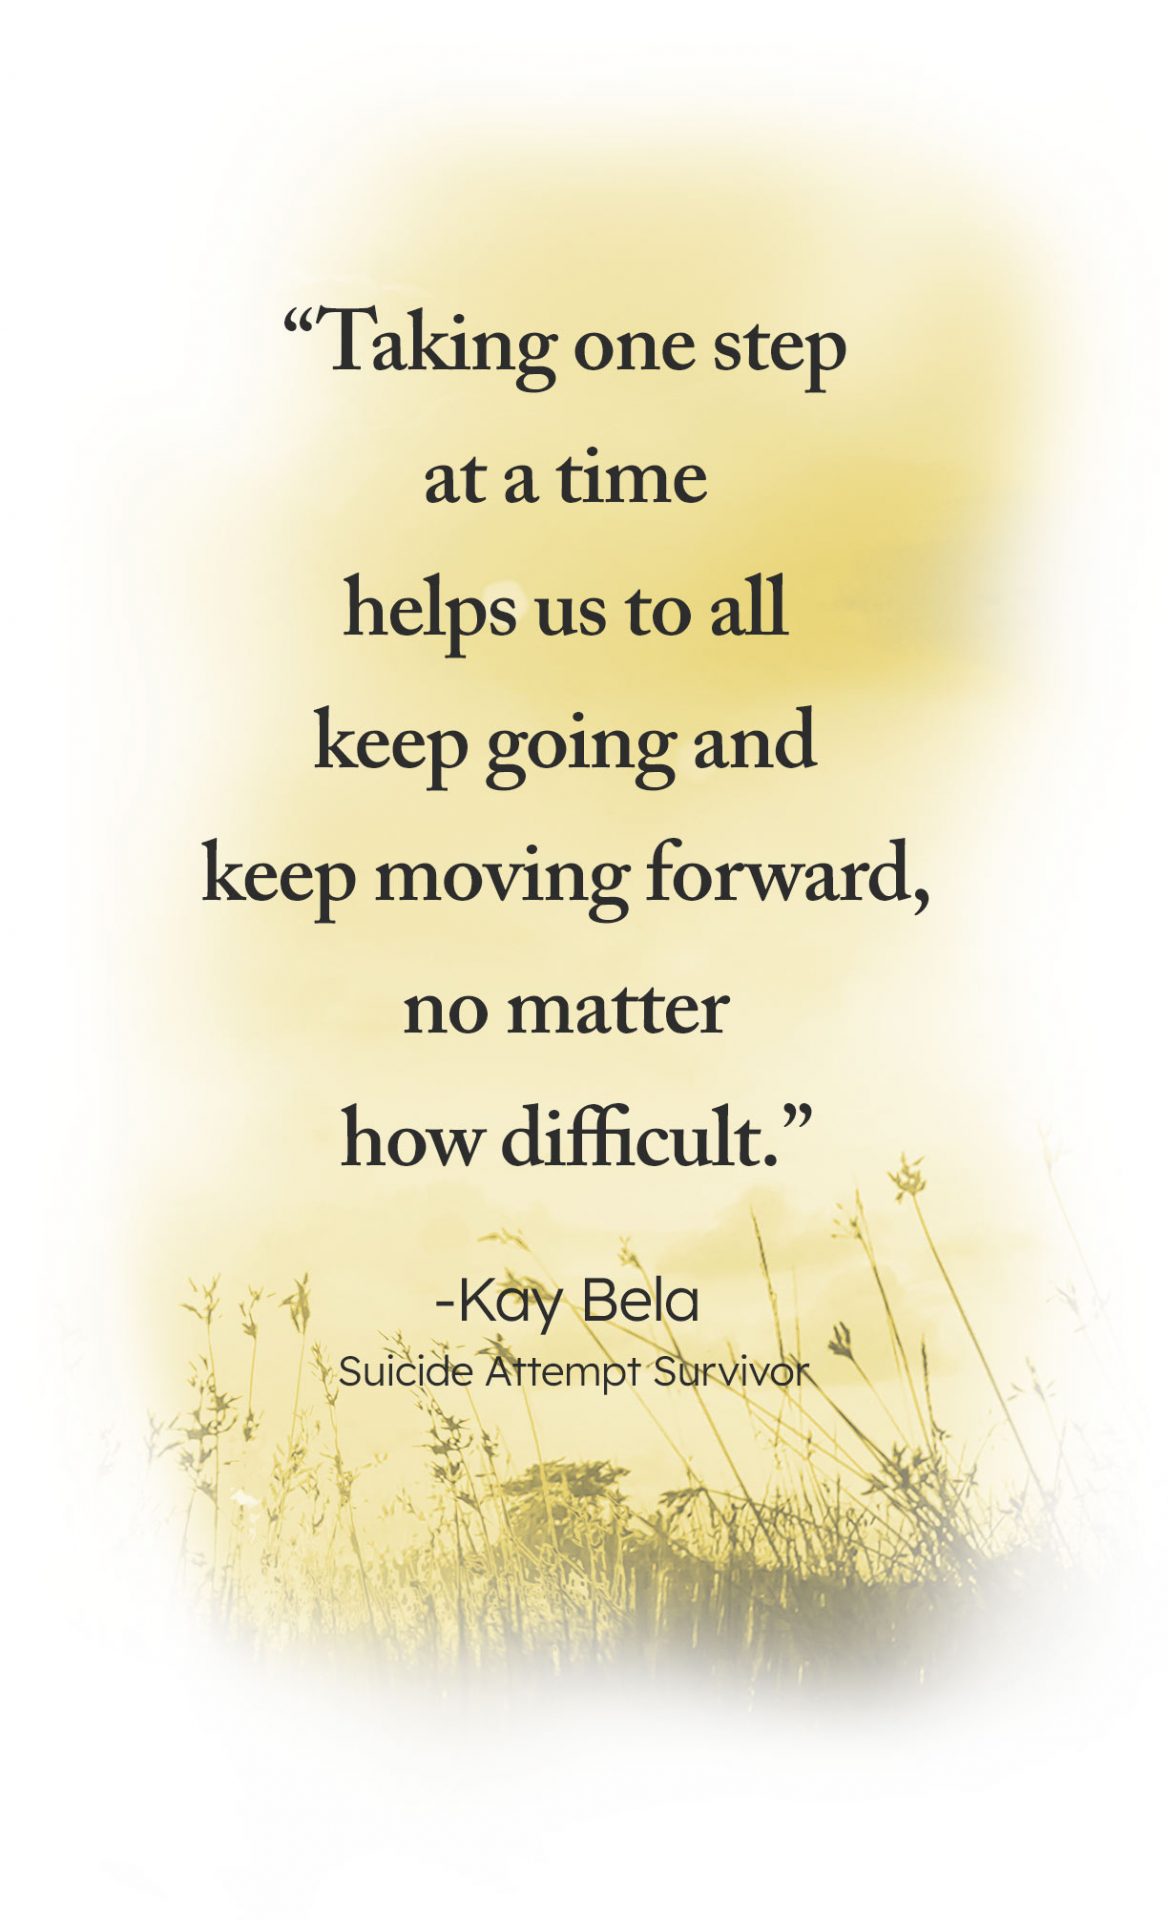 "Taking one step at a time helps us to all keep going and keep moving forward, no matter how difficult." -Kay Bella, Suicide Attempt Survivor